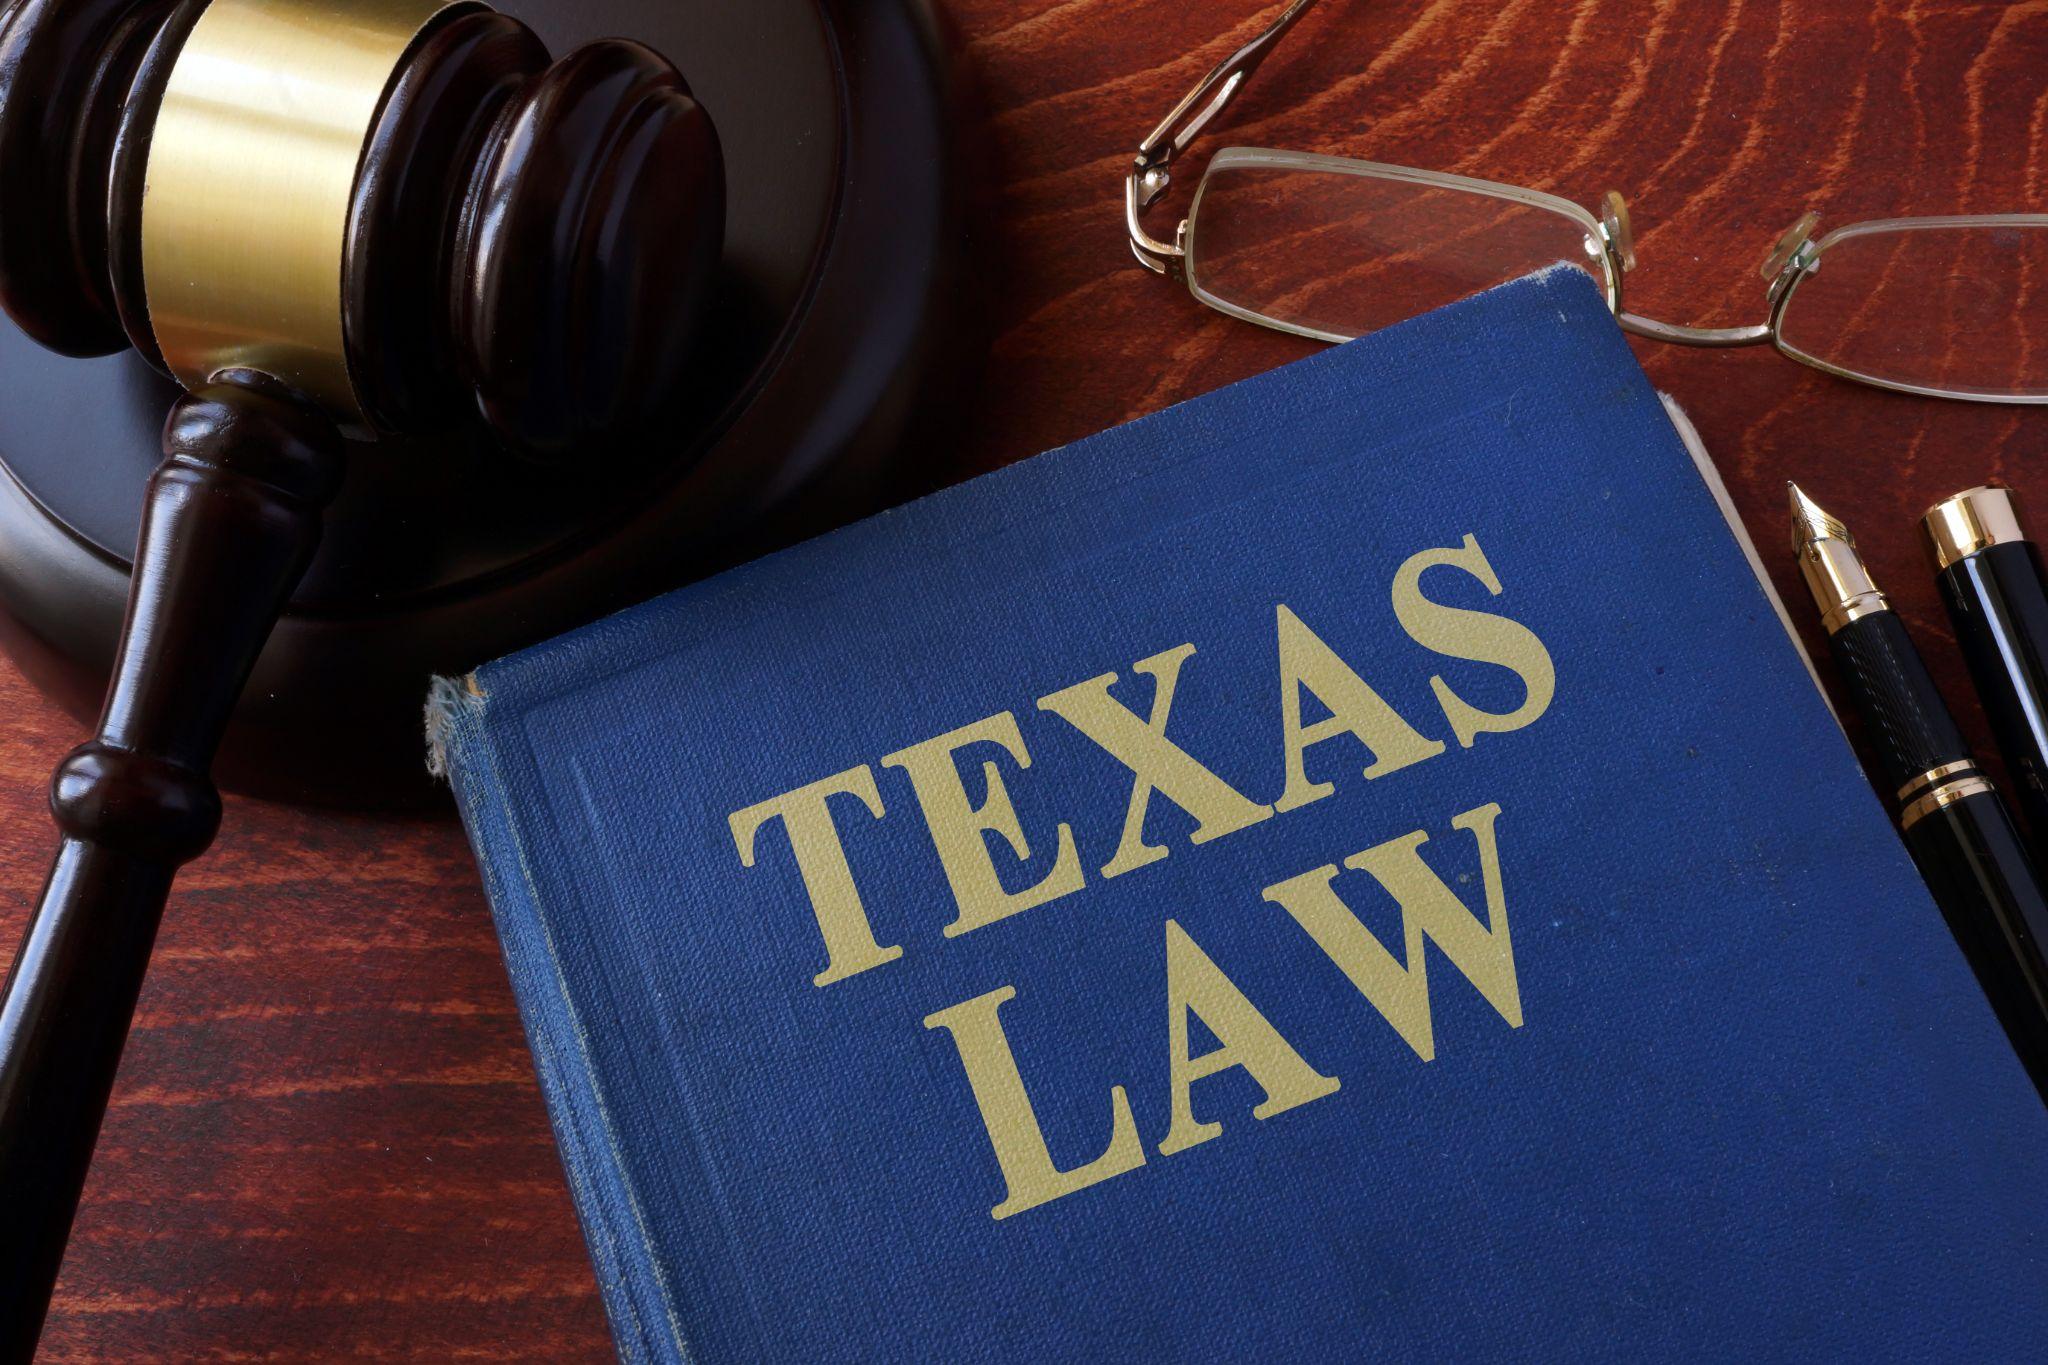 Book with title Texas law and a gavel.